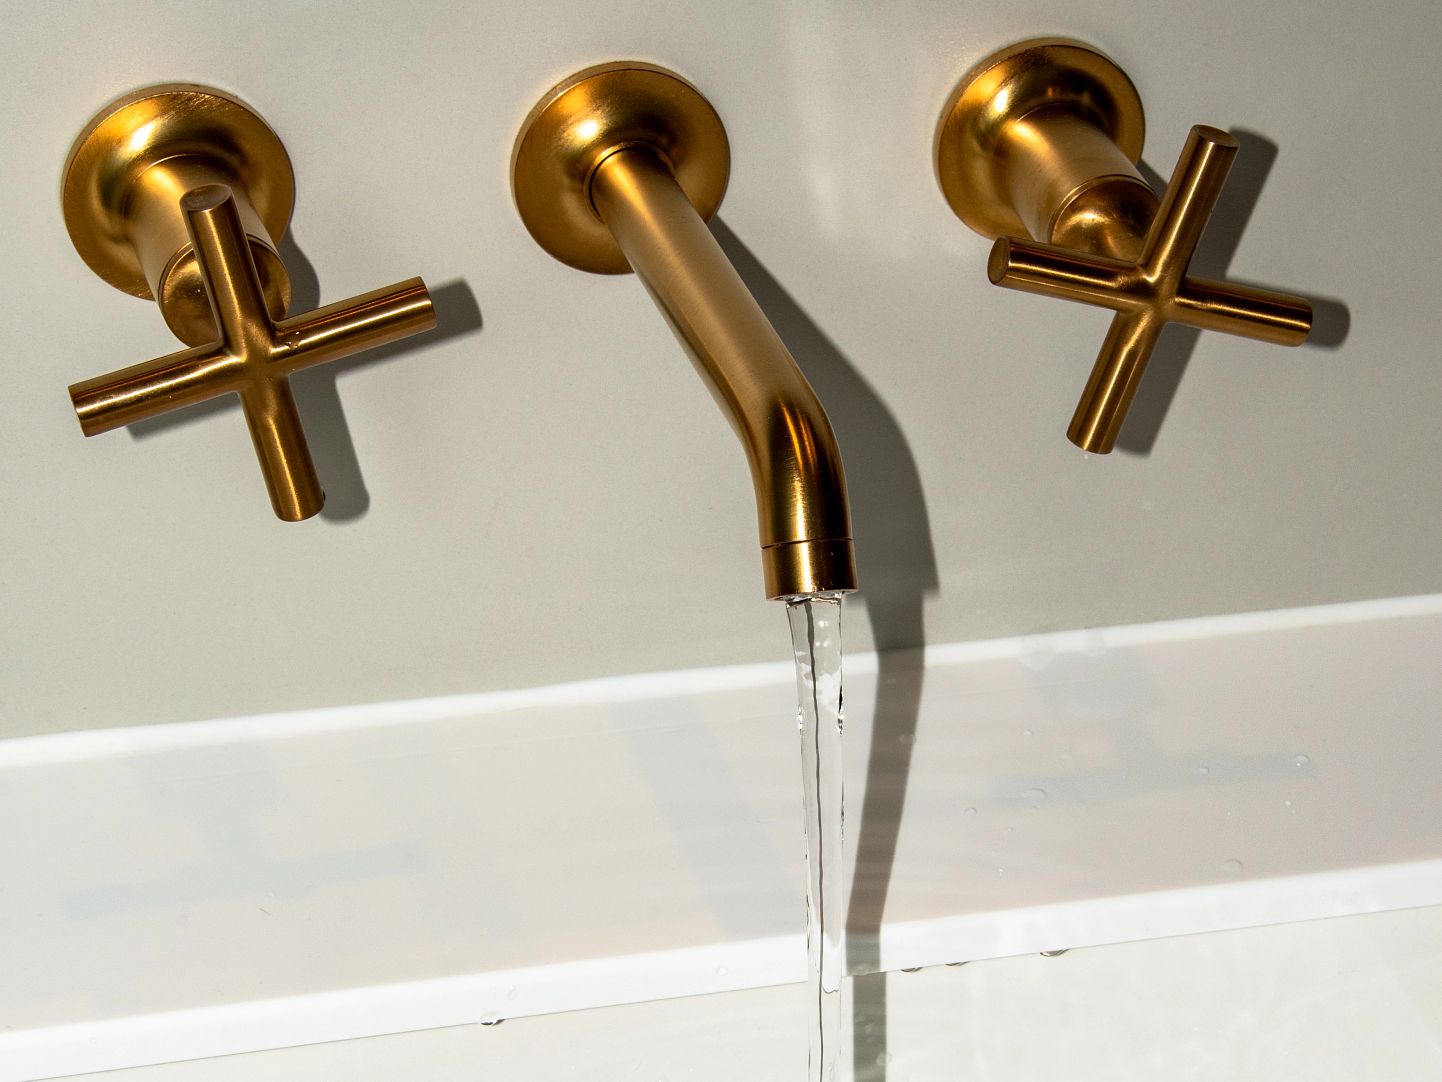 Hot and Cold Water flwoing from a Gold Coloured Stainless Steel Faucet